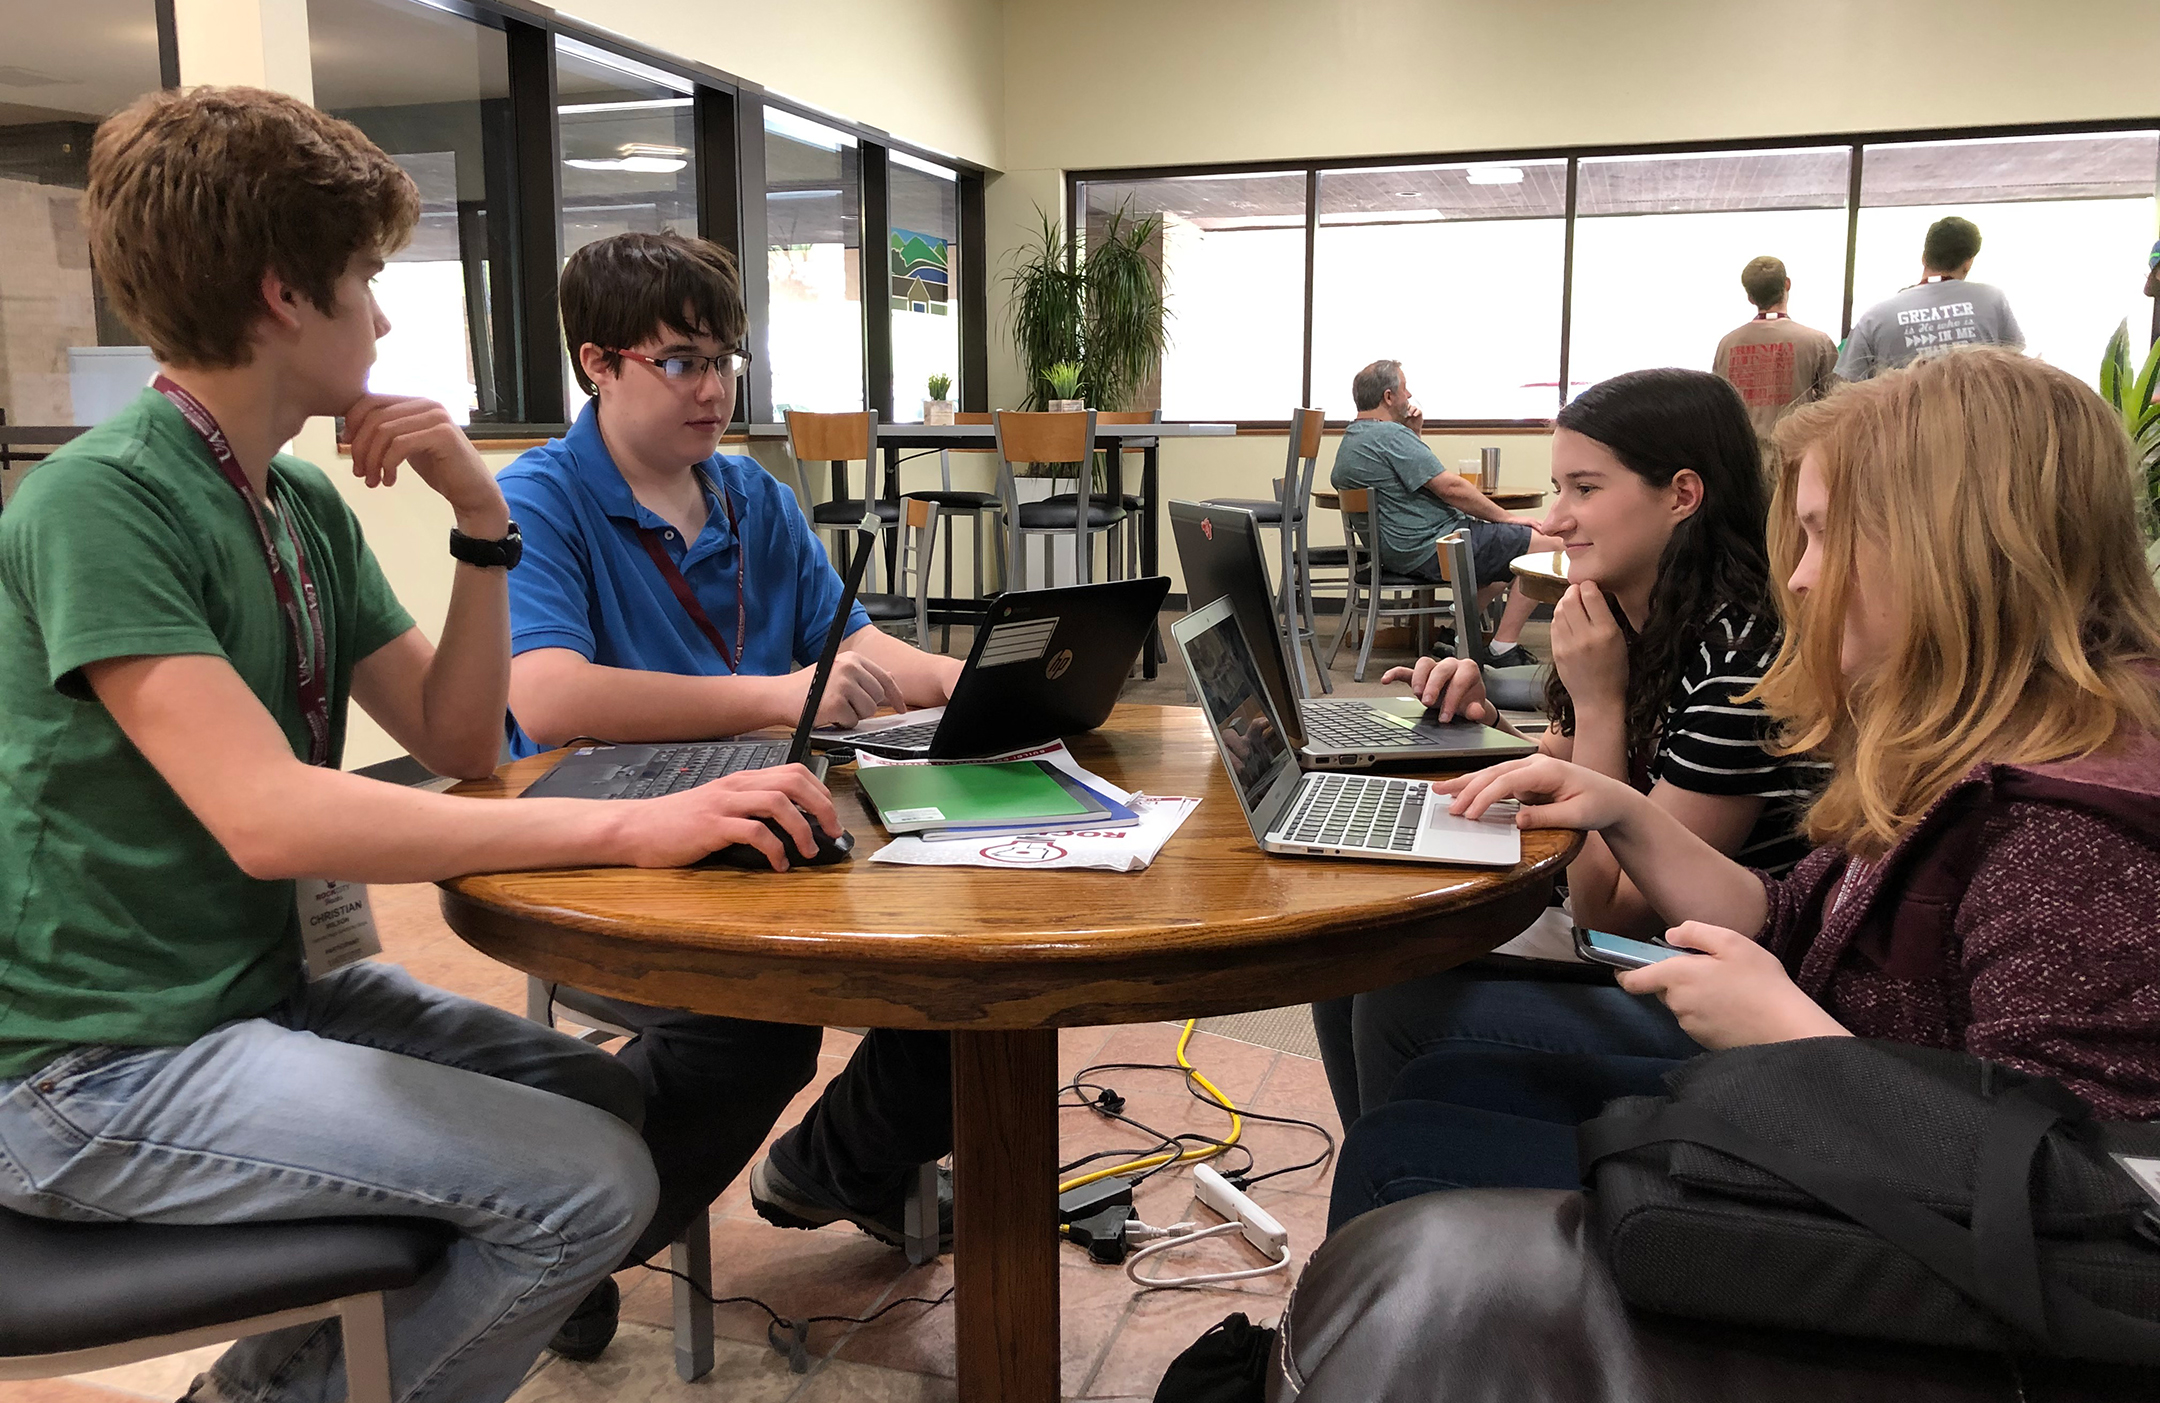 Four high school students, two boys and two girls, sit at a table each with their laptops open at a hackathon